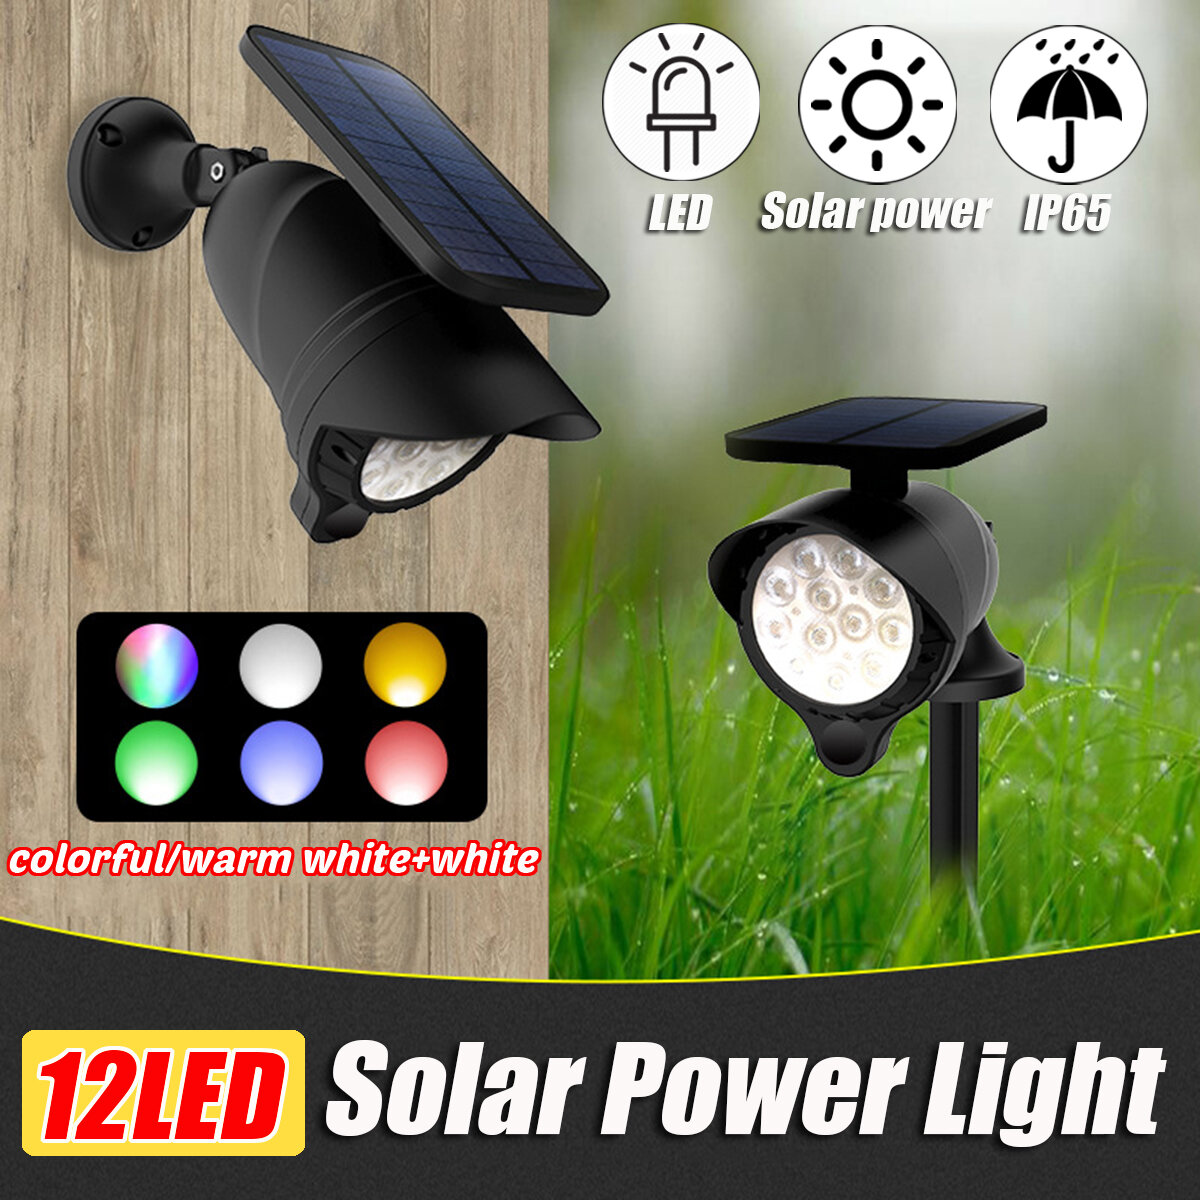 

Waterproof LED Solar Lawn Light Colorful/Warm White+White Outdoor Wall Ground Garden Pathway Security Lamp